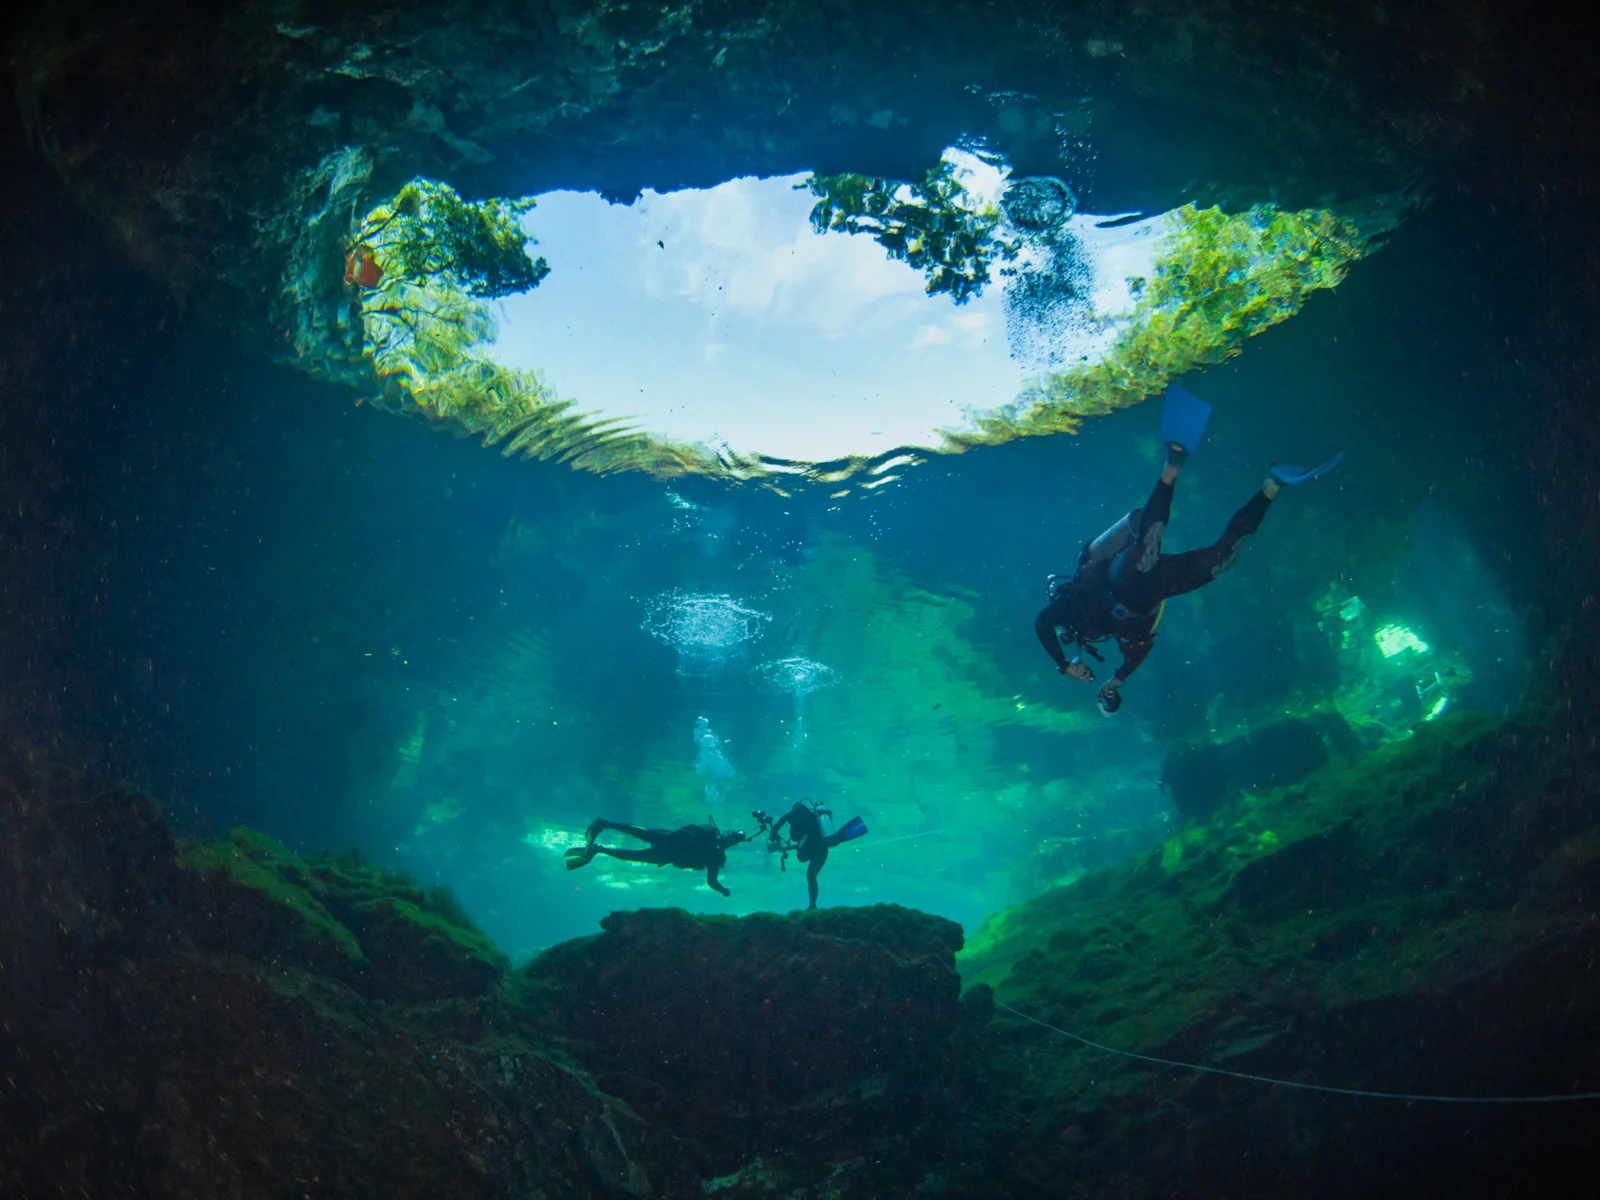 Cenote Ponderosa, one of the best cenotes in Mexico, as viewed from under the water